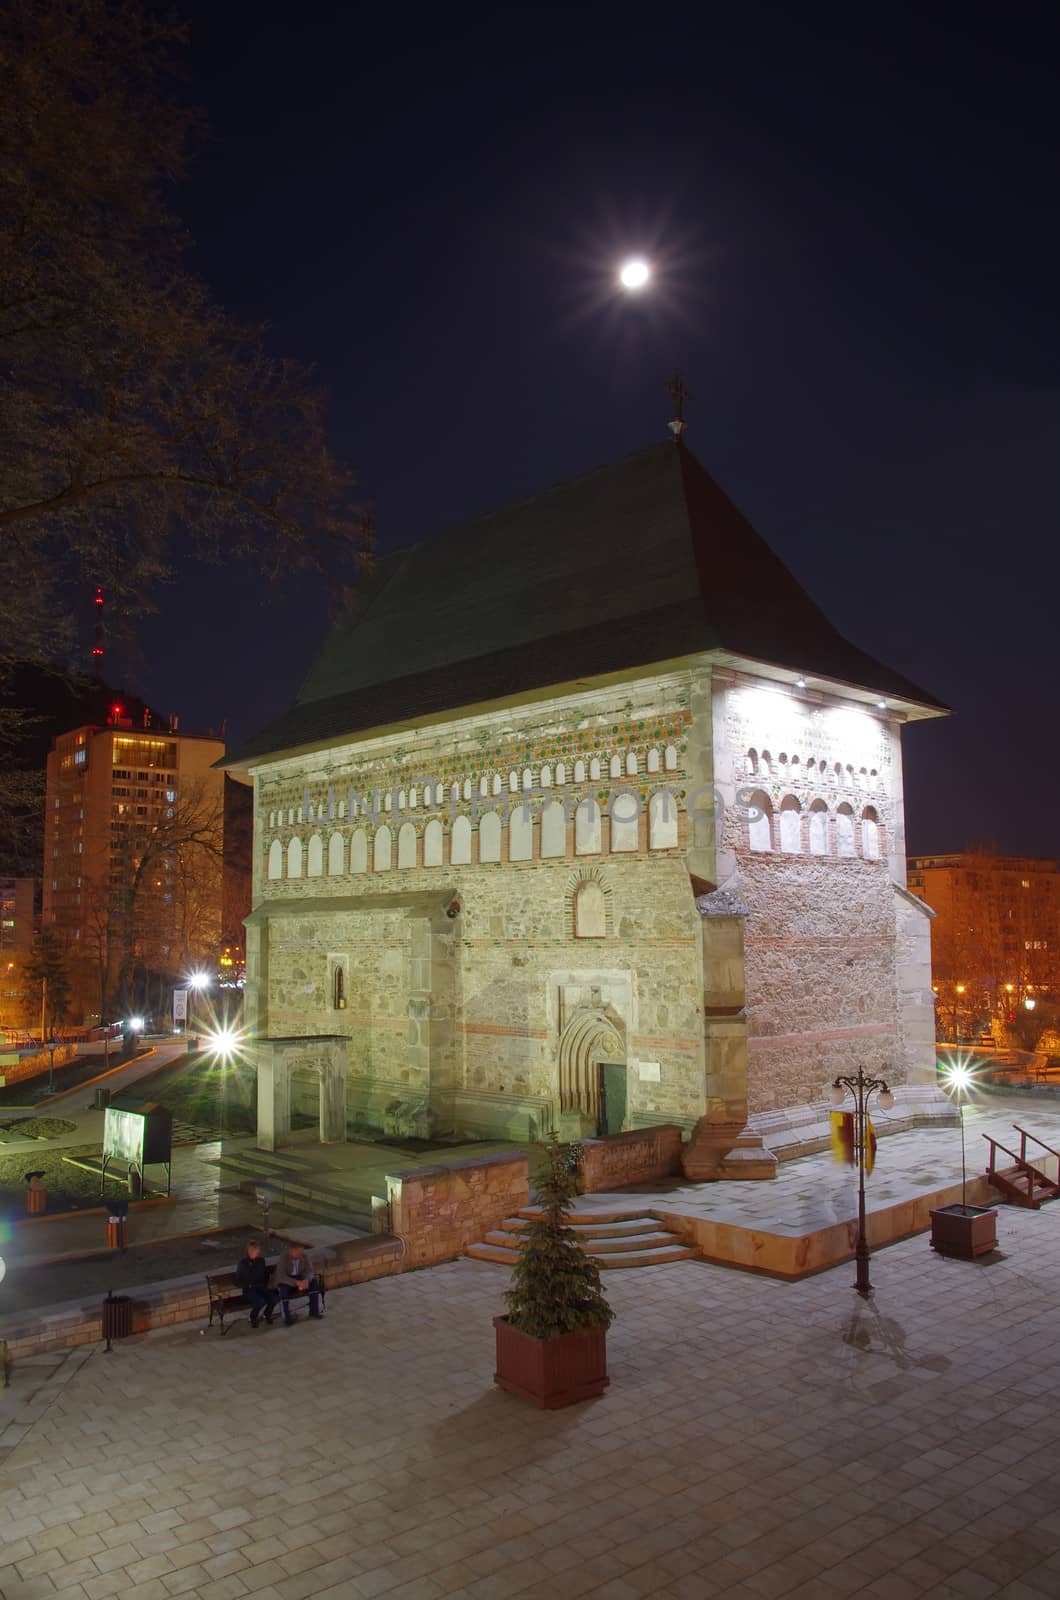 City square in Piatra Neamt: Royal Court  with Stephen the Great Church